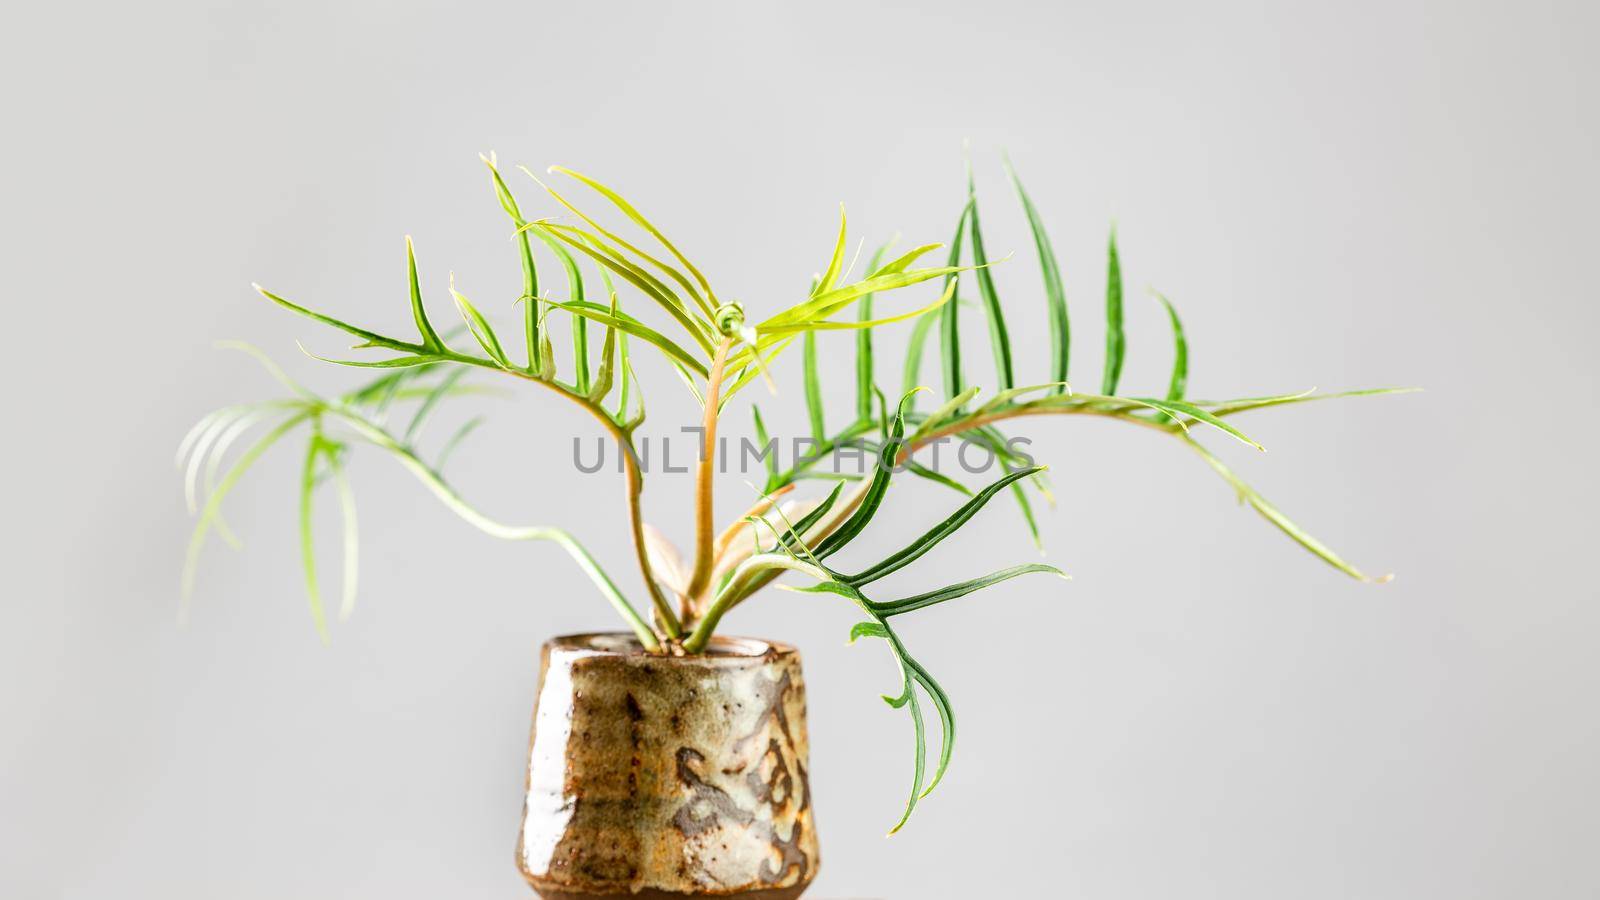 Philodendron Tortum plant with palm like leaves  by Syvanych